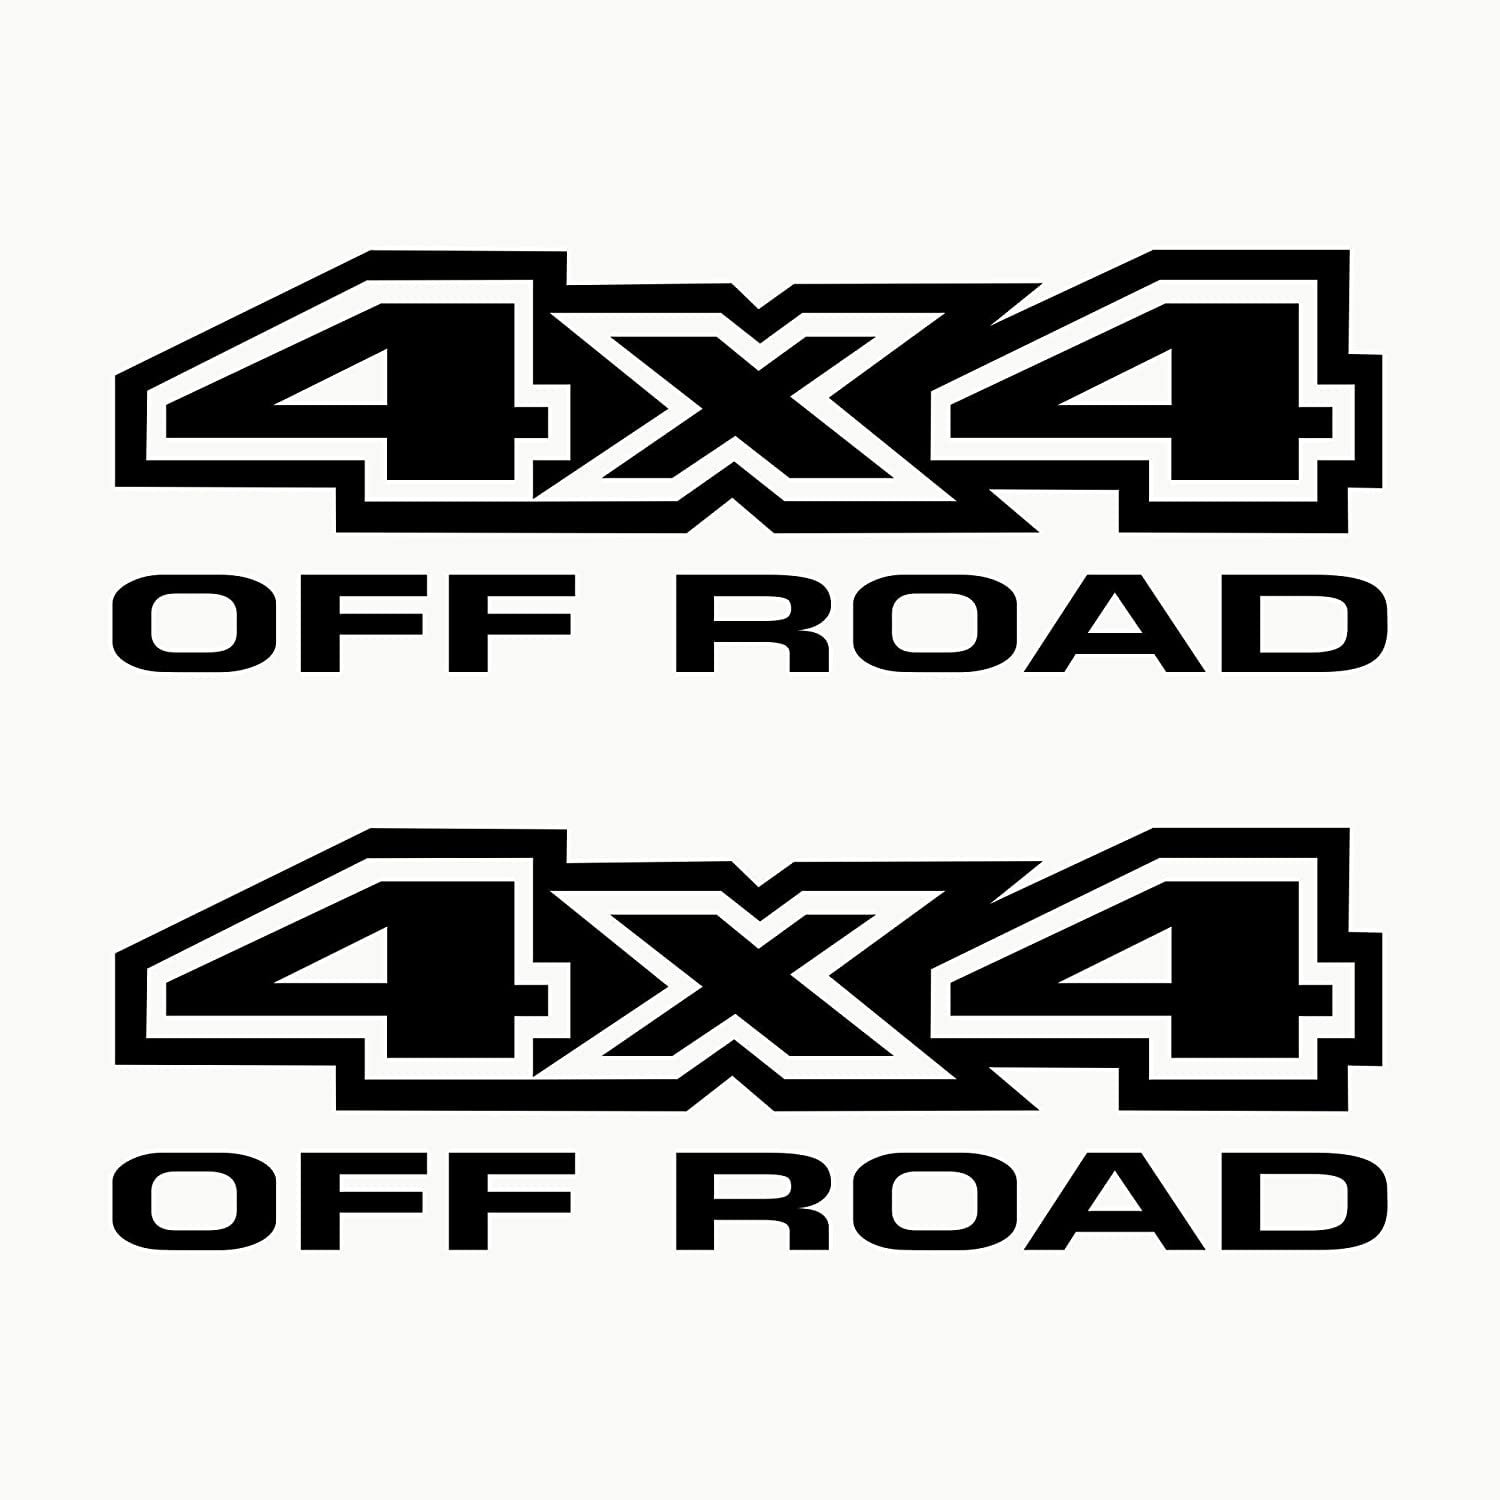 Doe voorzichtig poll Kano 4x4 off Road 4WD Sticker Pack of 2 for Car - Etsy